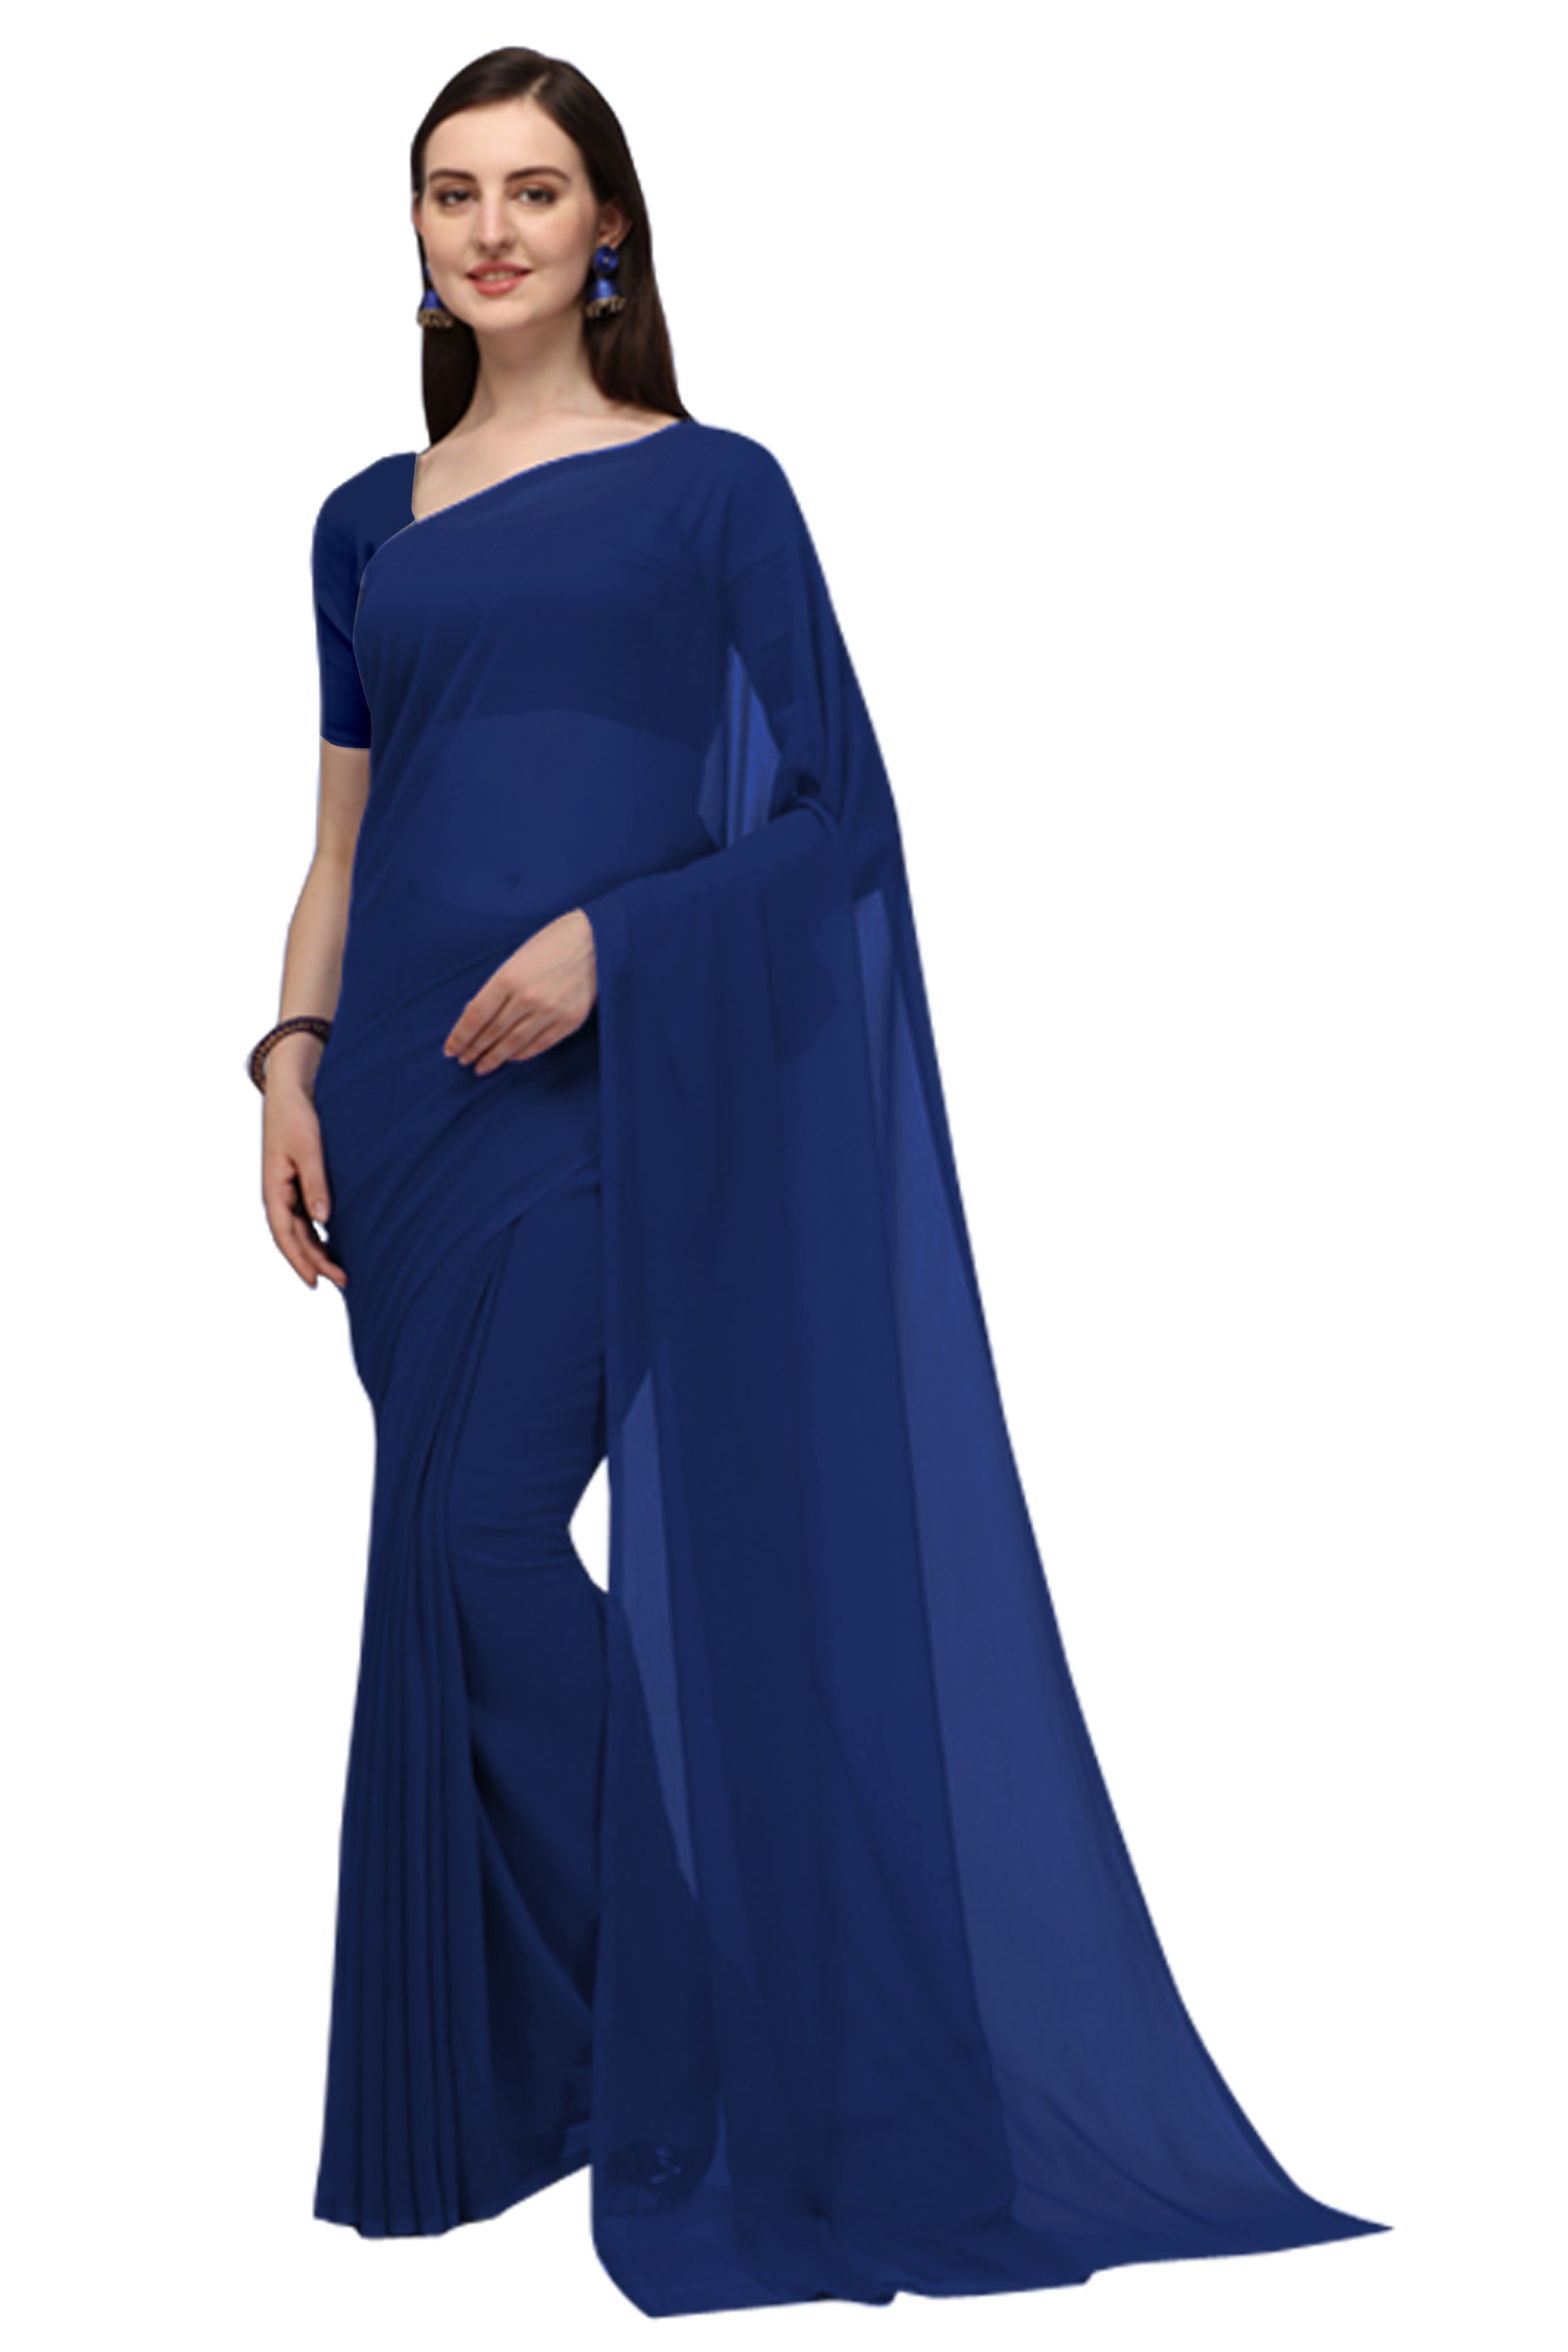 Women's Plain Woven Daily Wear  Formal Georgette Sari With Blouse Piece (Navy Blue) - NIMIDHYA